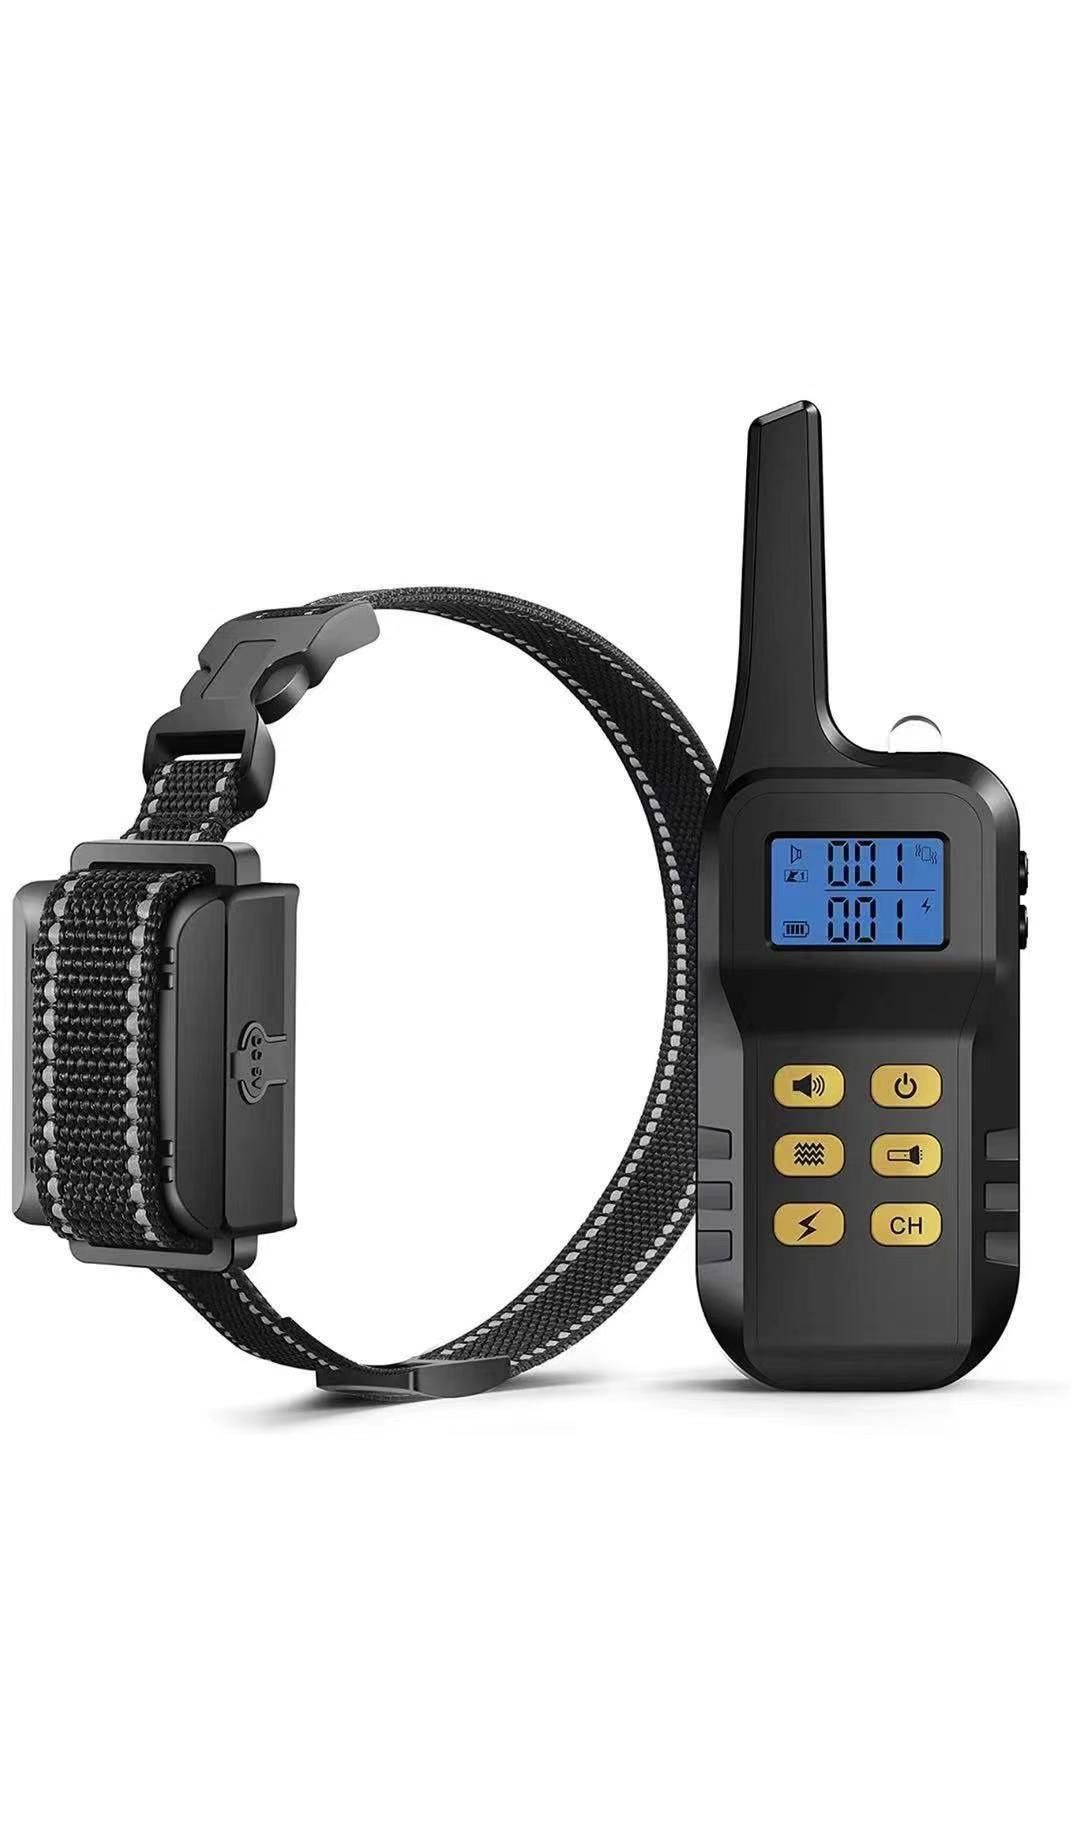 Dog Training Collar, Shock Collar for Dogs with Remote Range Up to 3,300ft Rechargeable and Vibration, Beep, Shock and Night Light Modes for Small Med